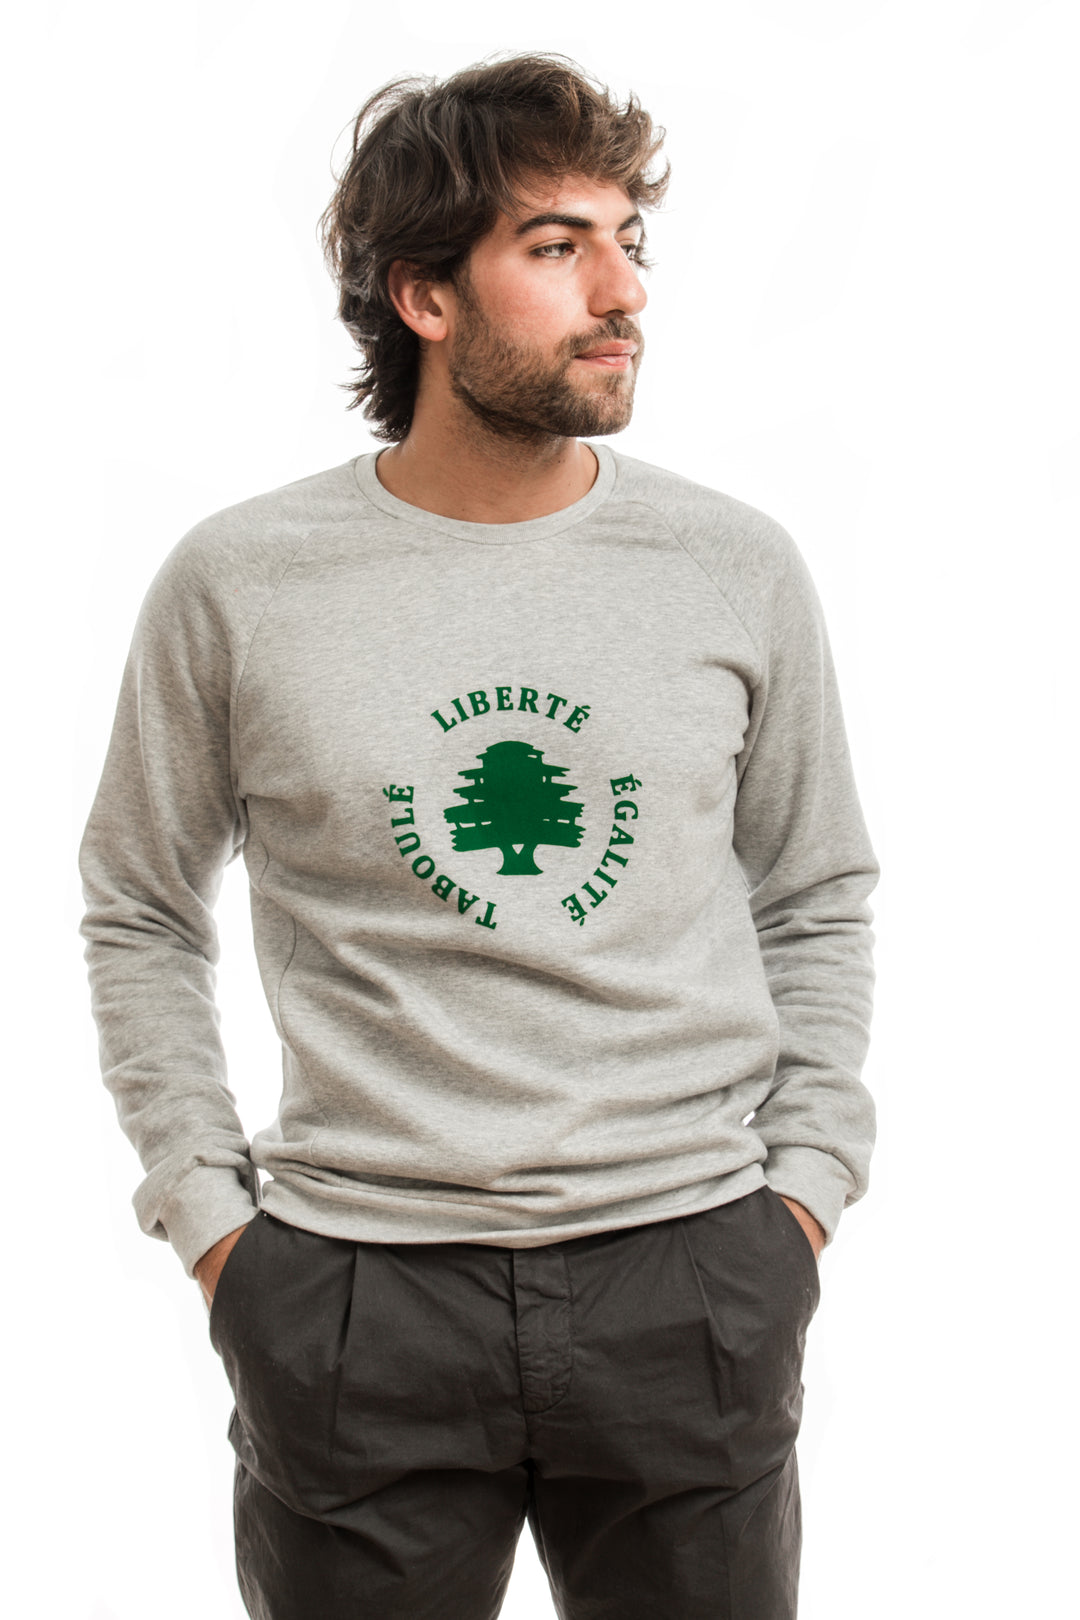 Young adult male wearing grey Sweater with Liberté Égalité Taboulé written in French and printed in green velvet in the center of the sweater along with black trousers.